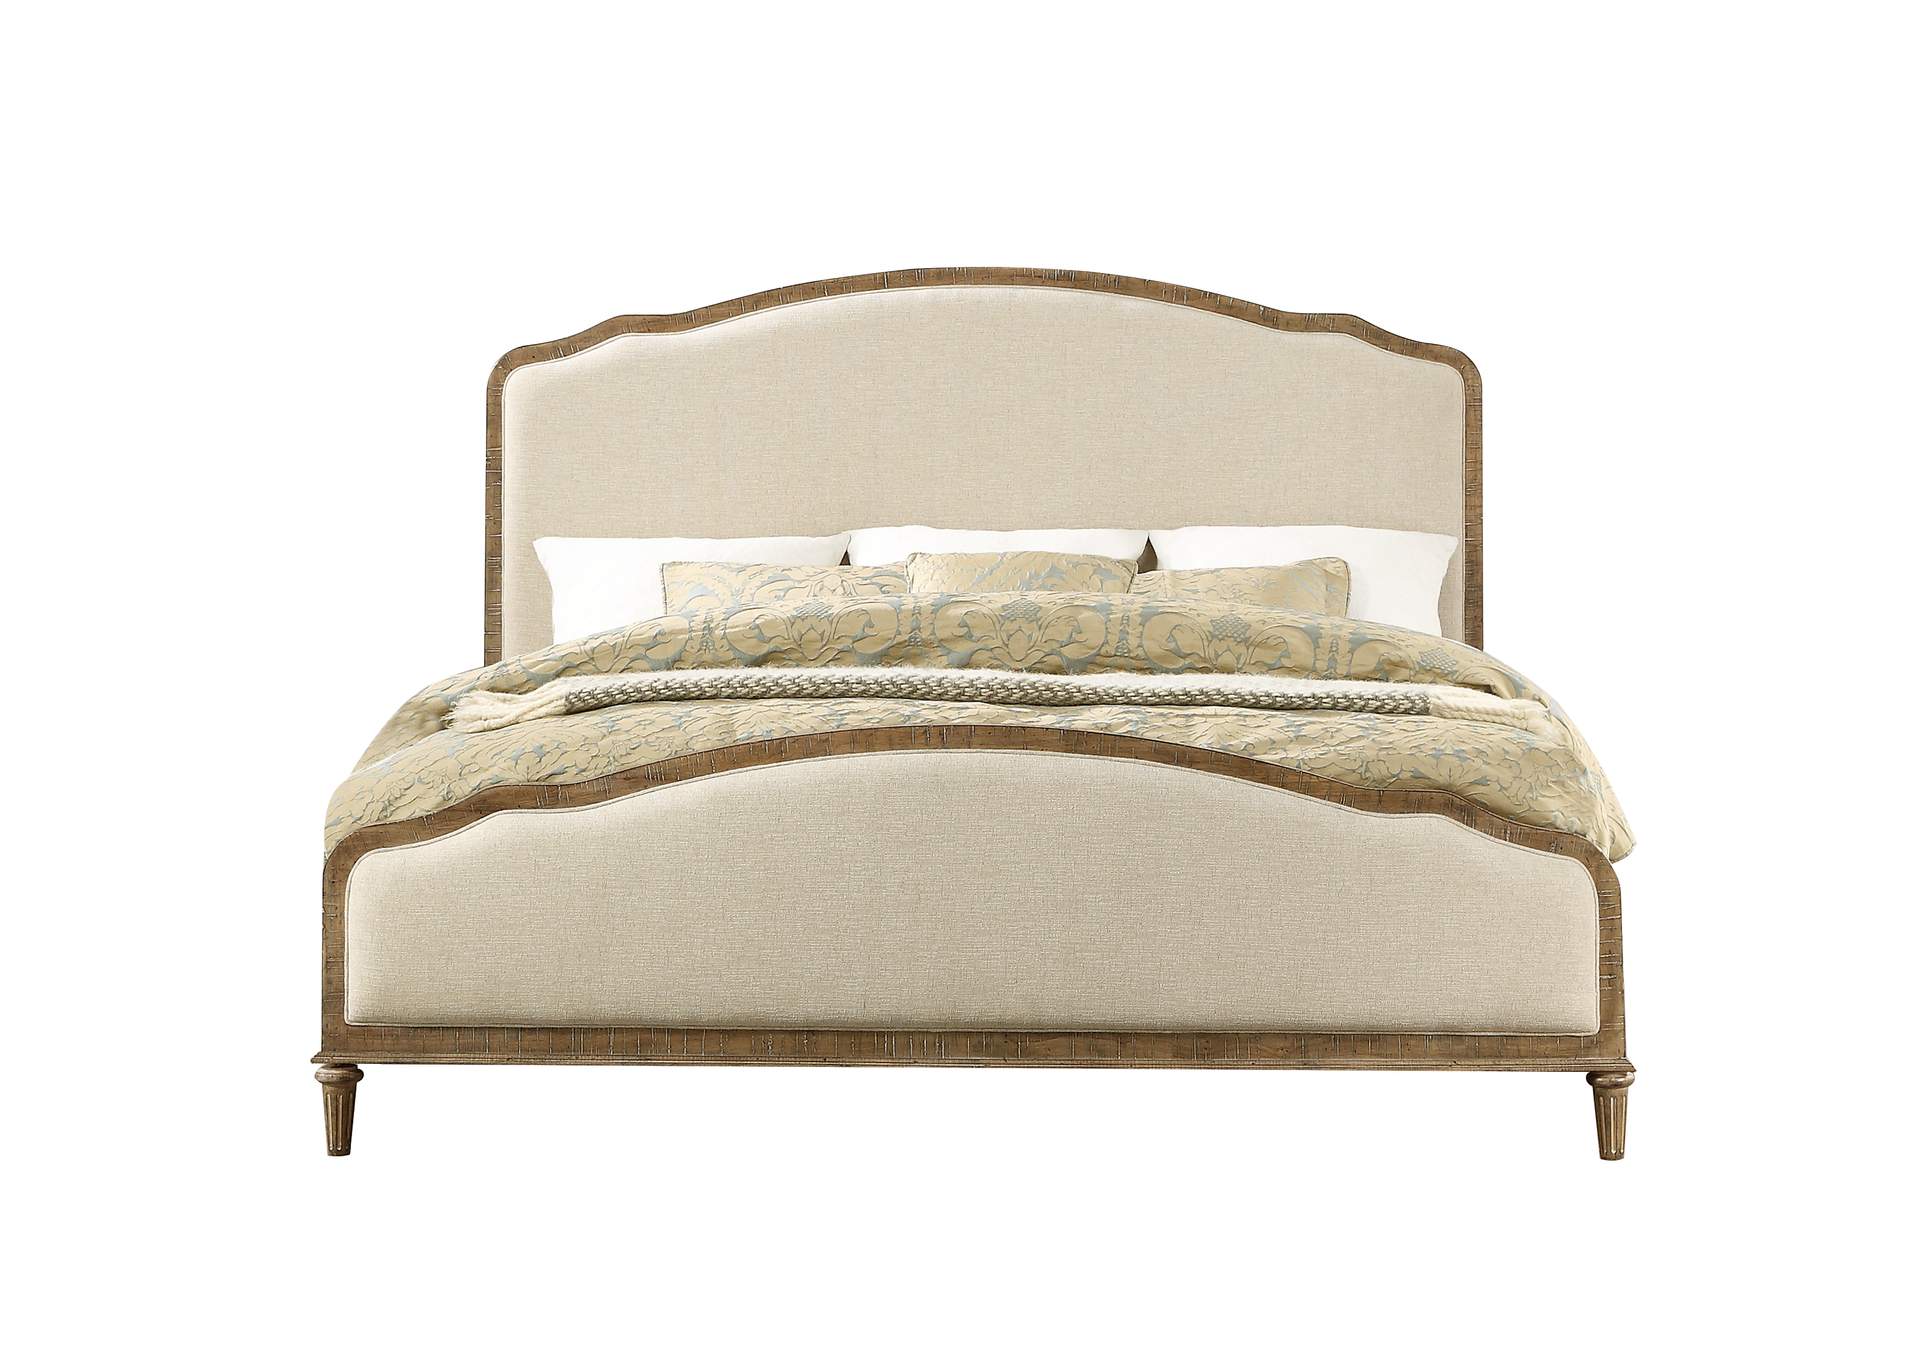 Interlude Queen Upholstered Bed,Emerald Home Furnishings